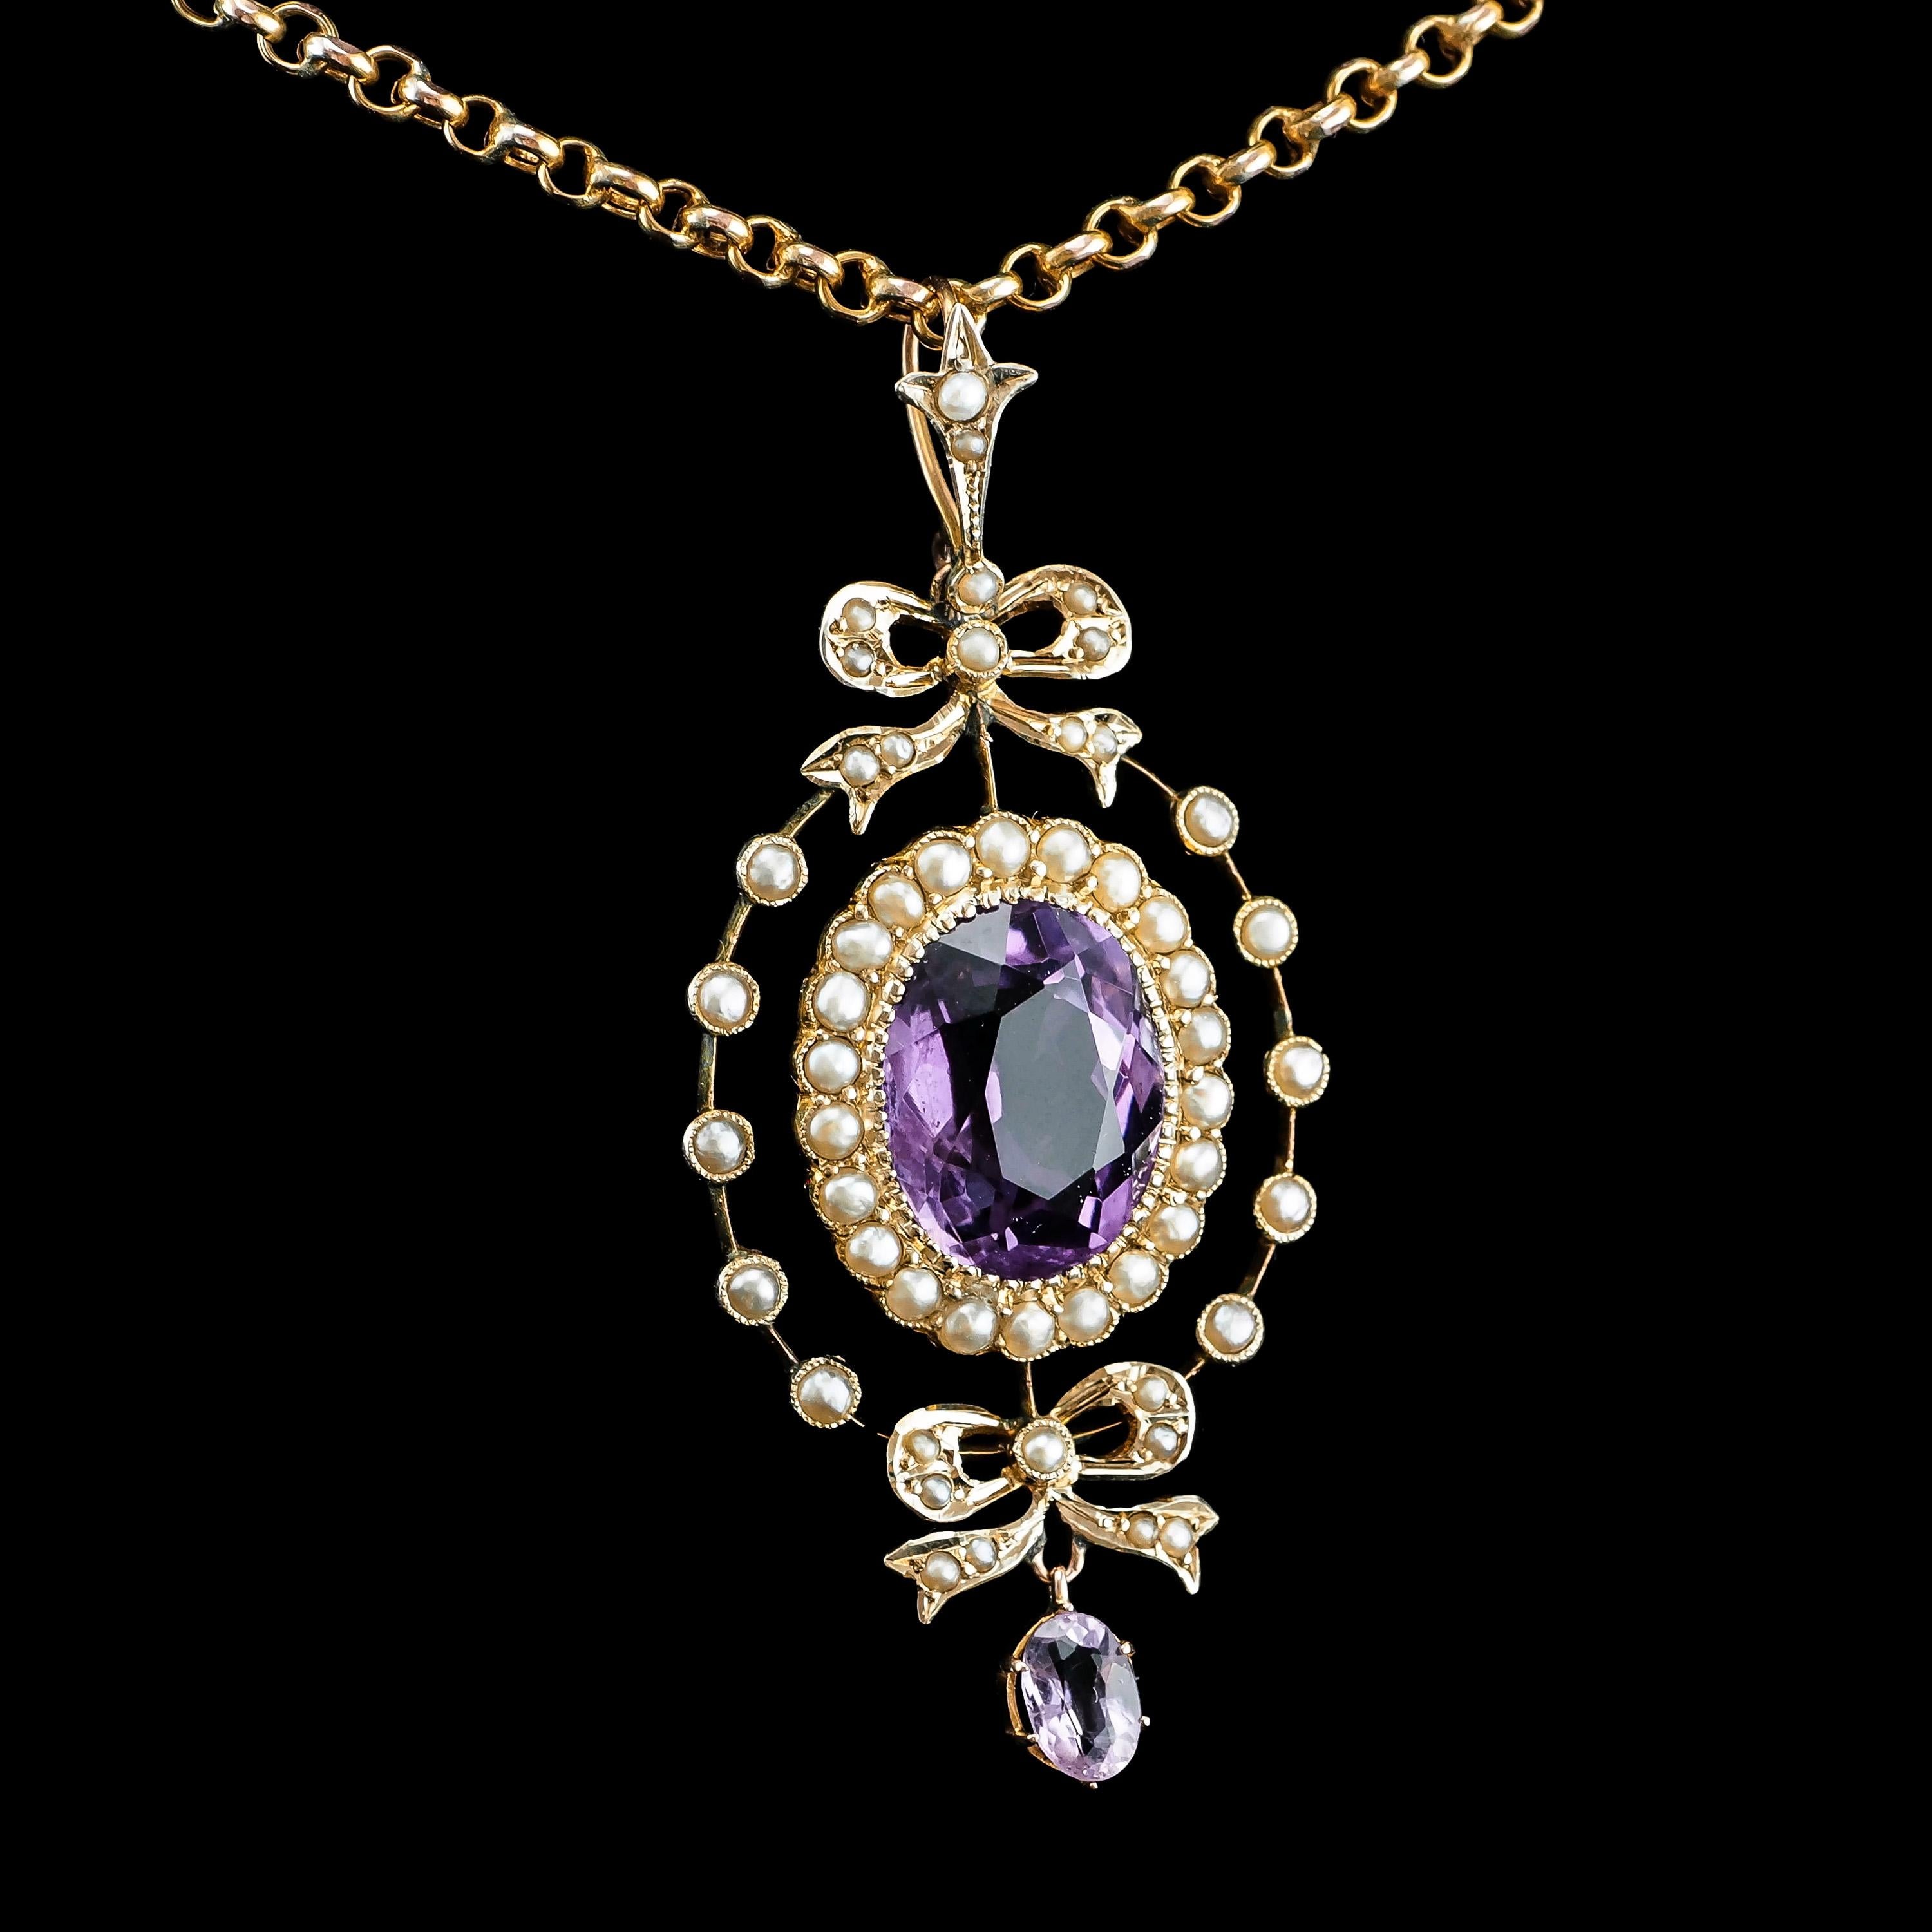 Antique Edwardian Amethyst & Seed Pearl 9k Gold Necklace Pendant, circa 1905 7